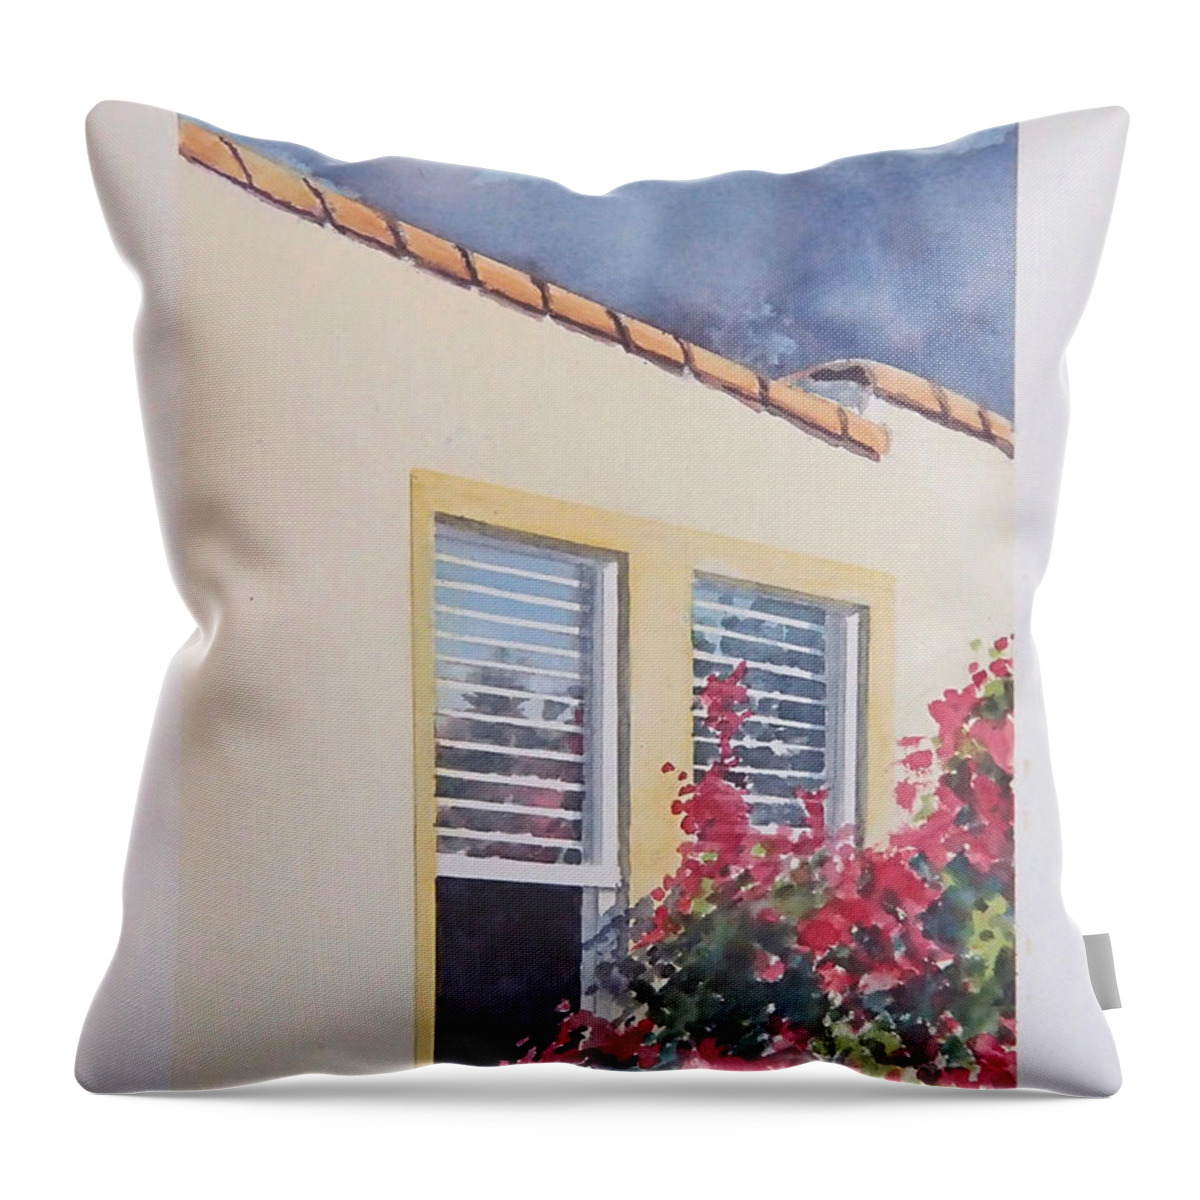 Cottage Throw Pillow featuring the painting Pismo Cottage by Philip Fleischer